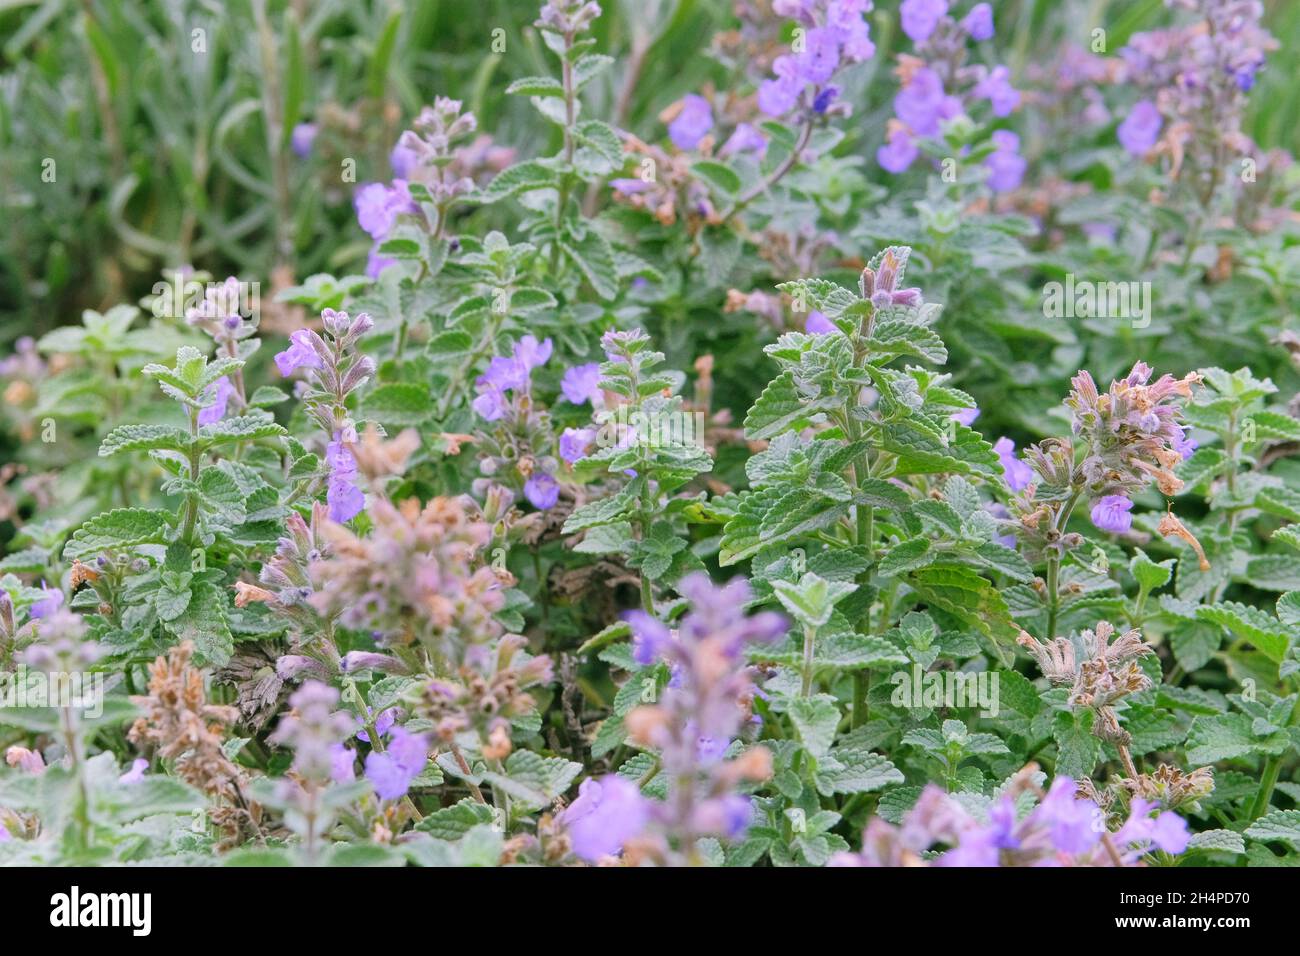 Melissa grown in a rustic farm garden. Melissa flowers in farming and harvesting. Open ground flat bed into the farmland. Stock Photo